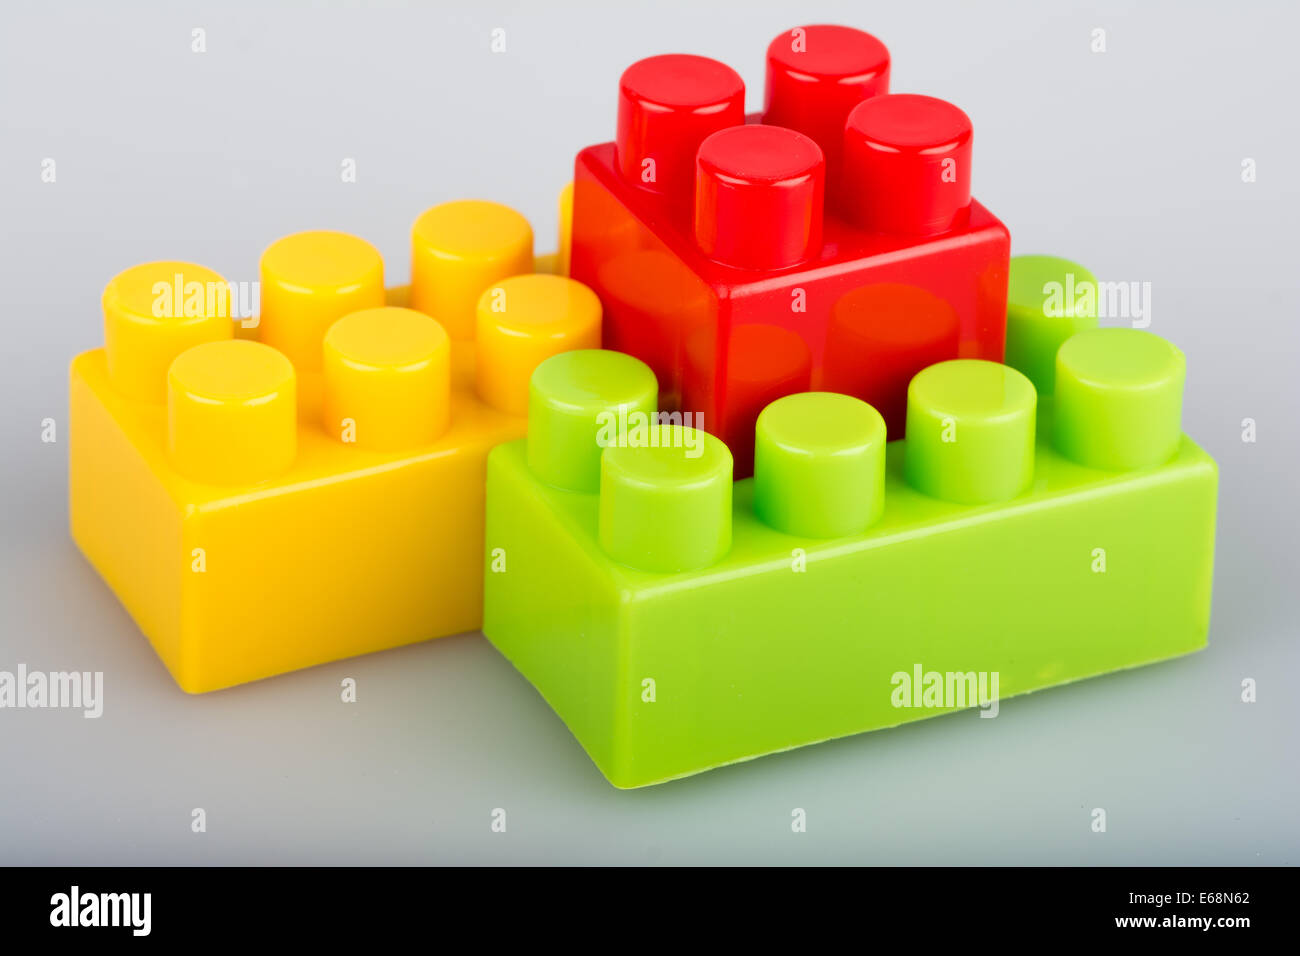 A stack of three plastic colored cubes isolated Vector Image